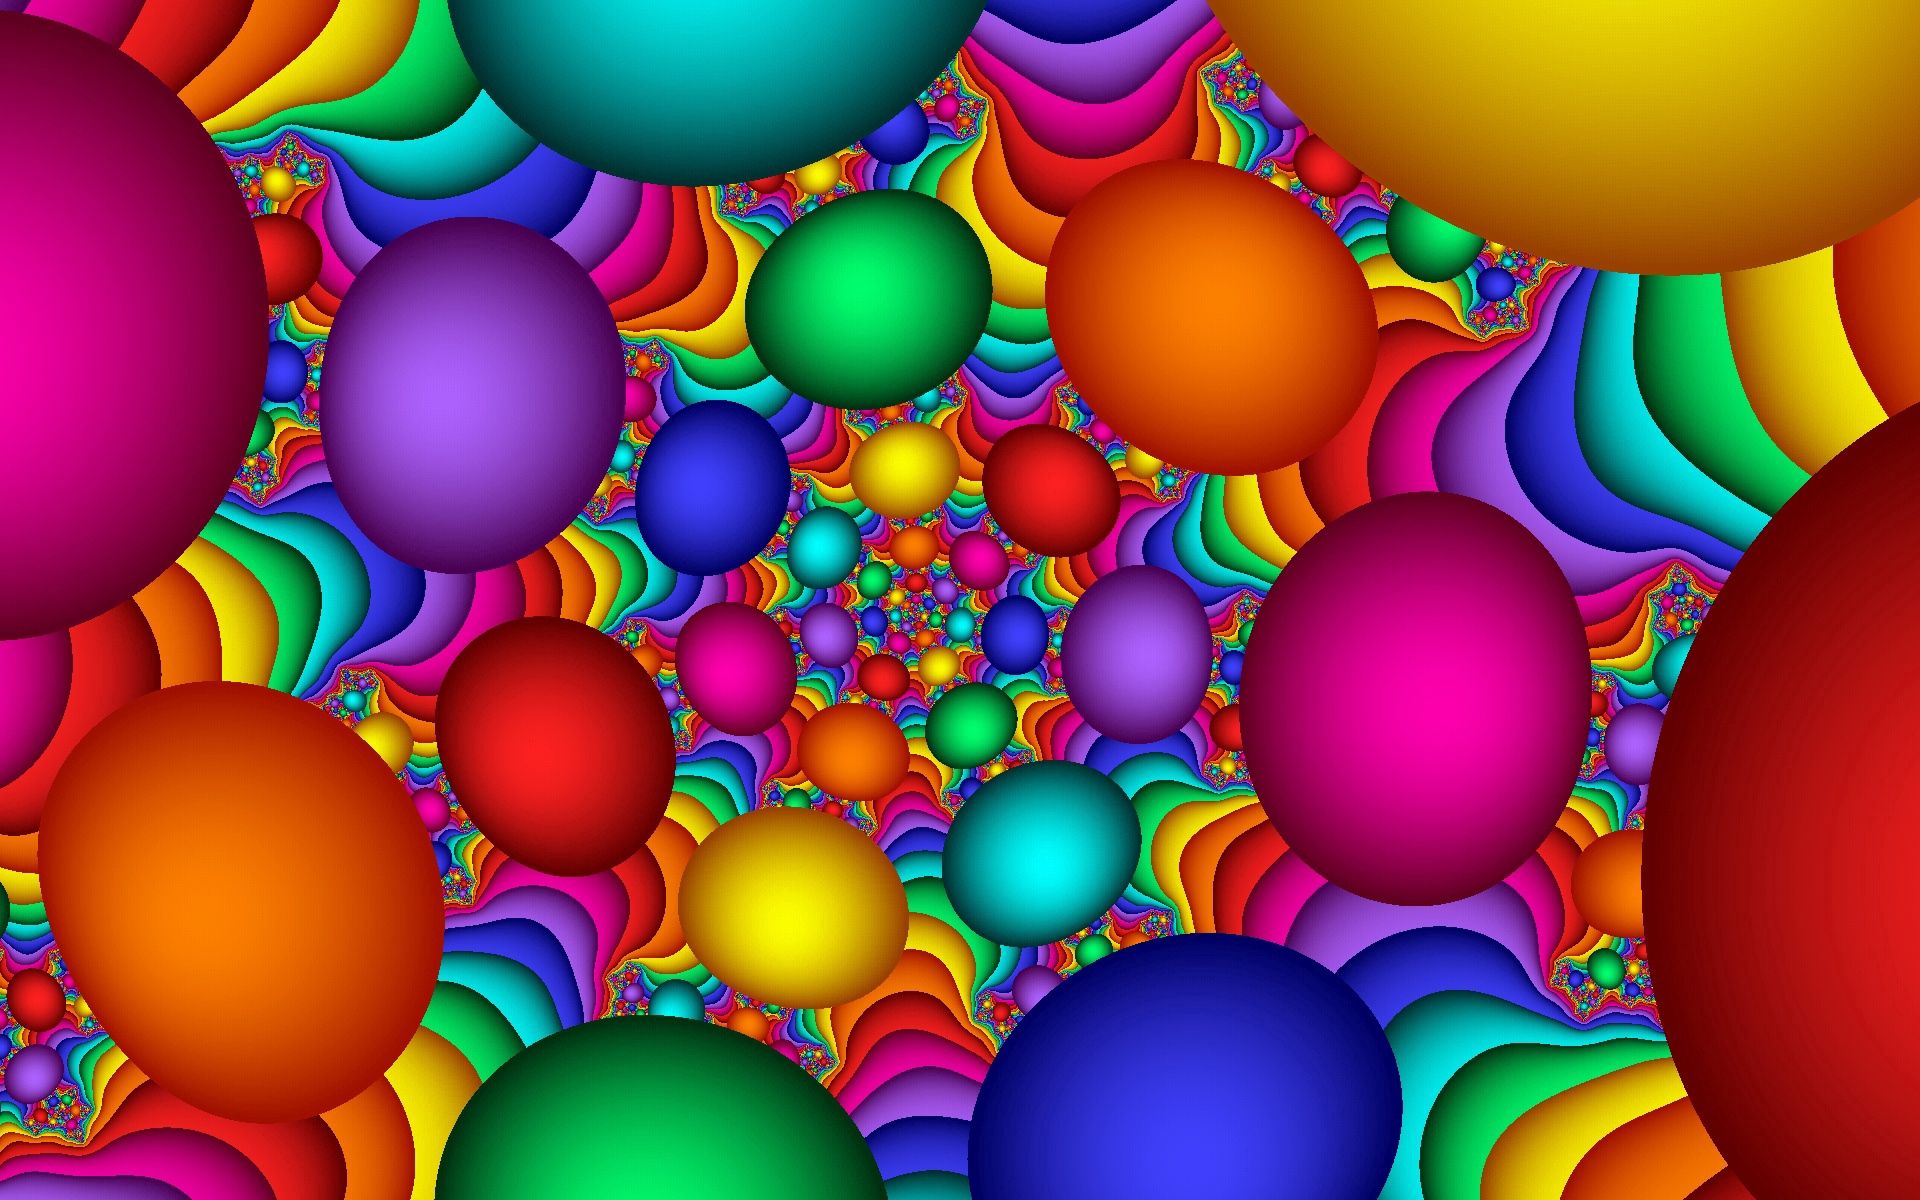 motley, multicolored, balls, abstract, background, bright 4K, Ultra HD